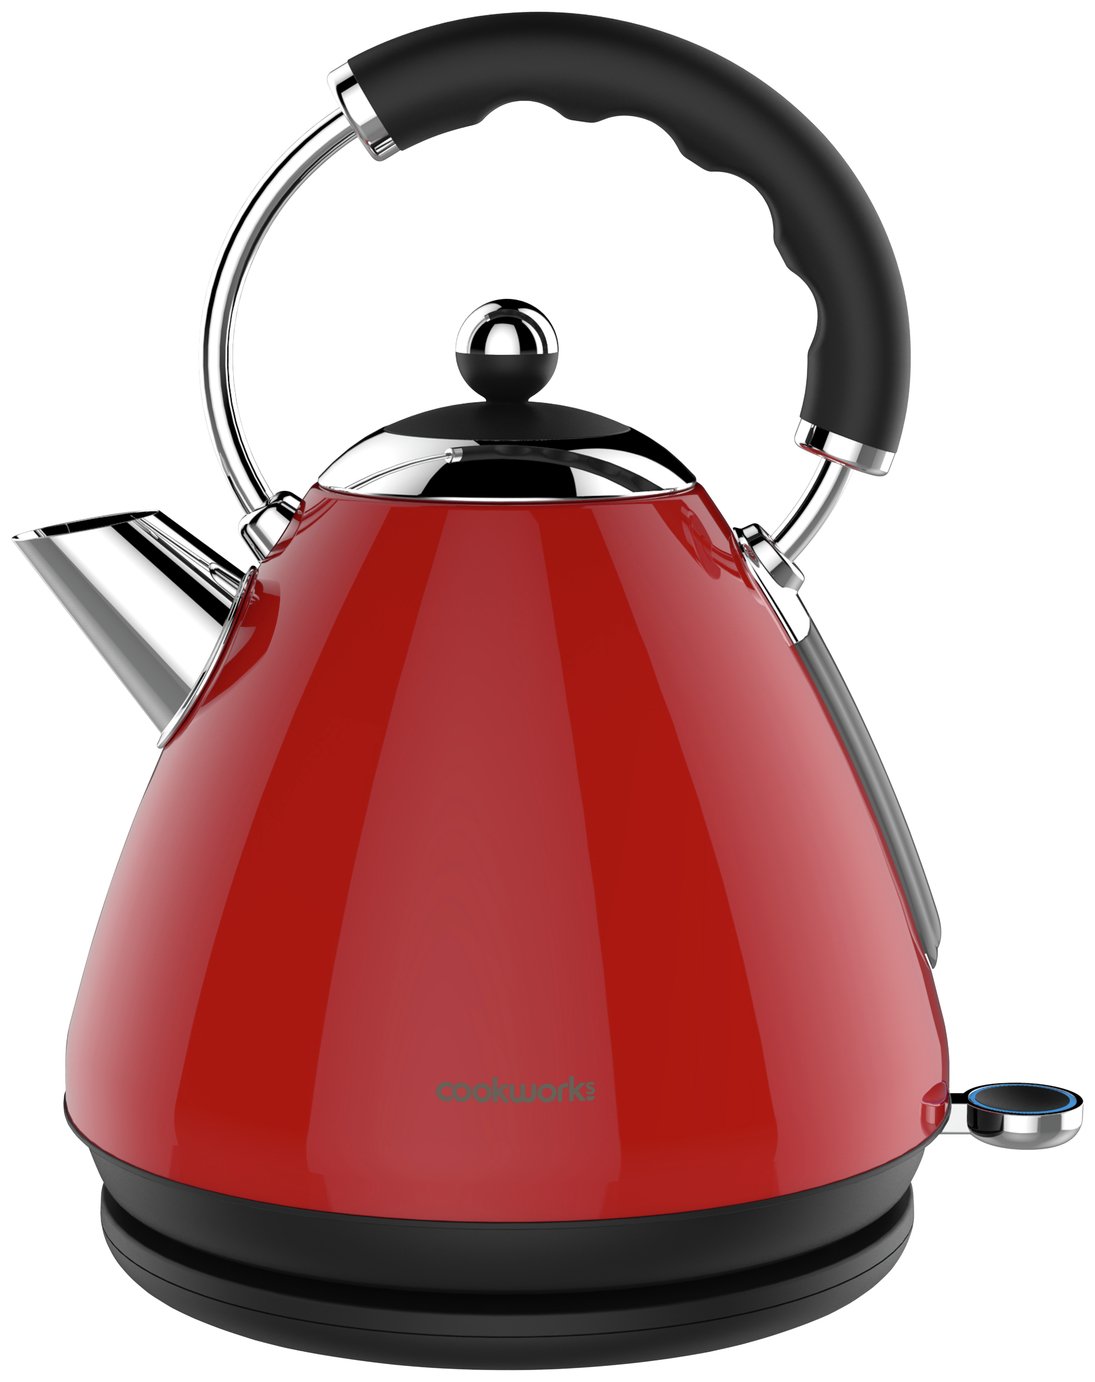 Cookworks Pyramid Kettle - Red